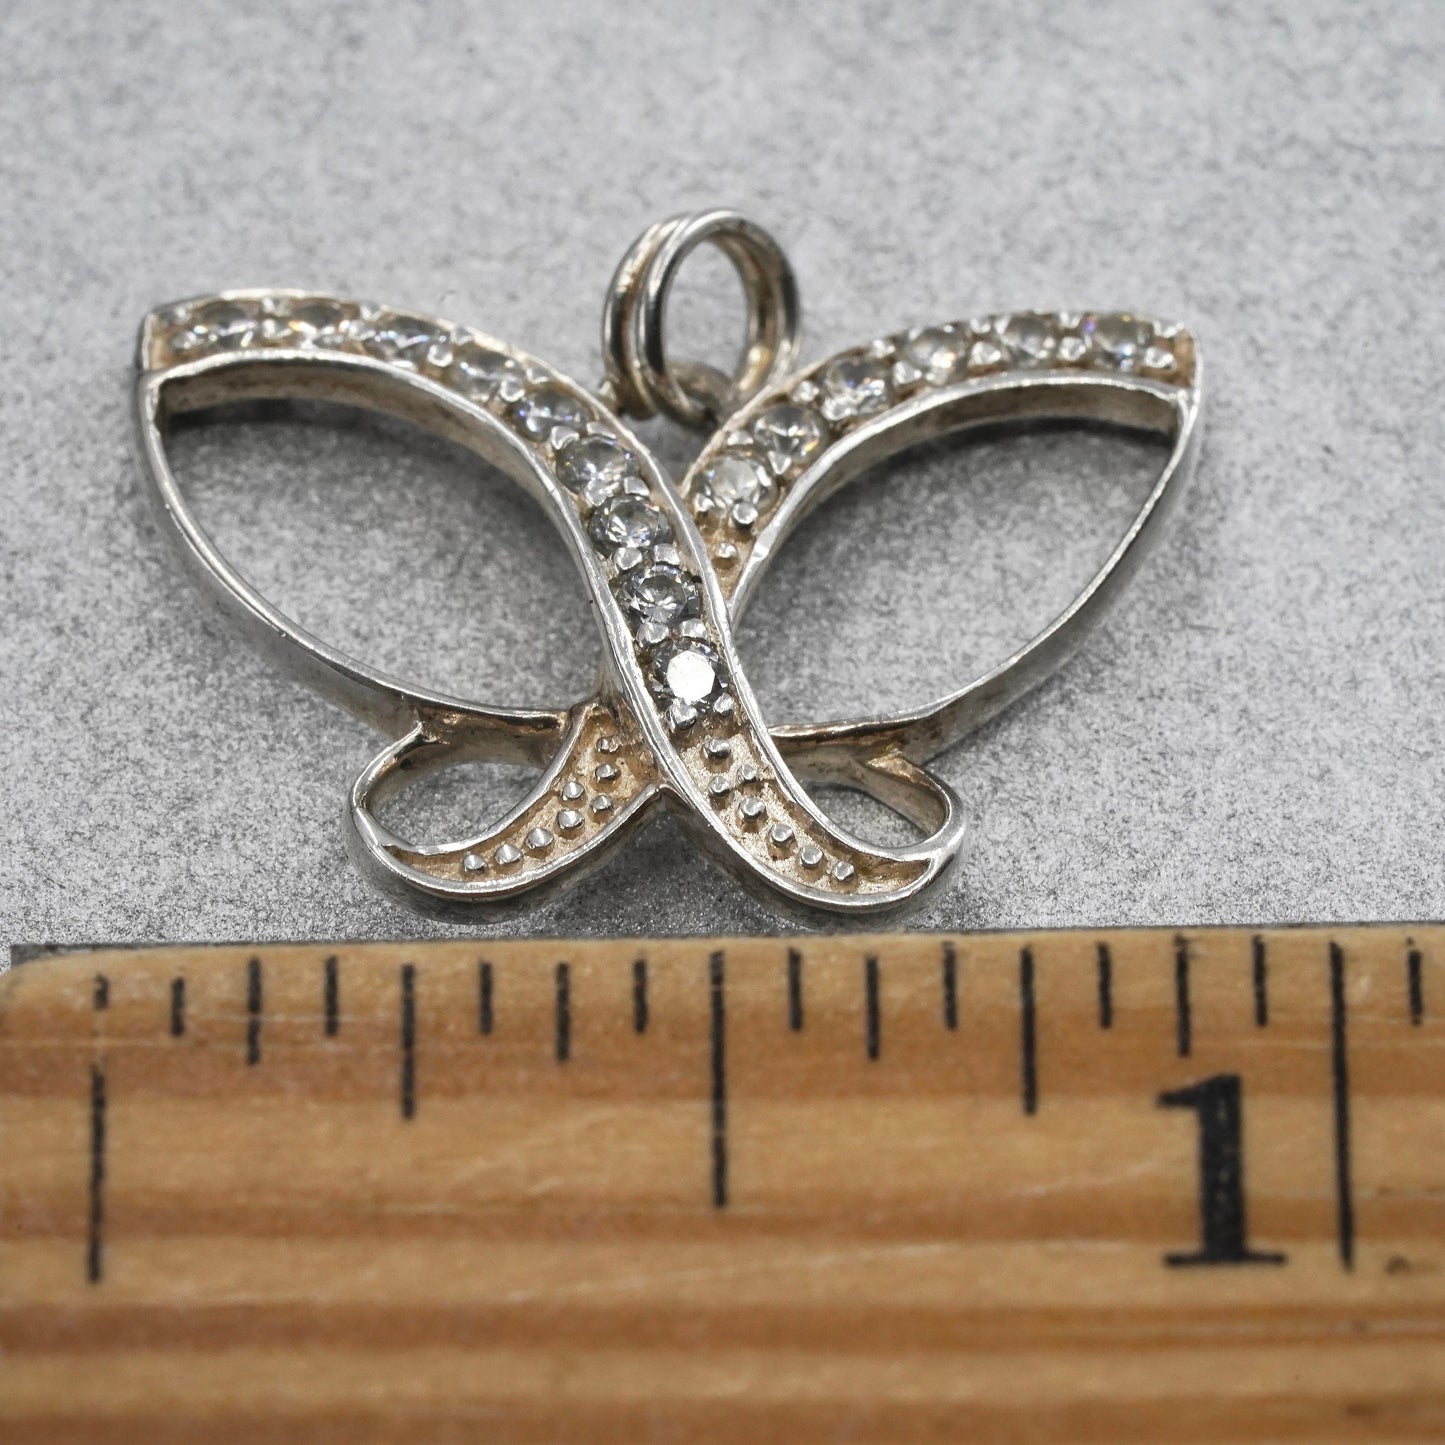 Vintage Sterling silver handmade charm, 925 butterfly pendant with cz